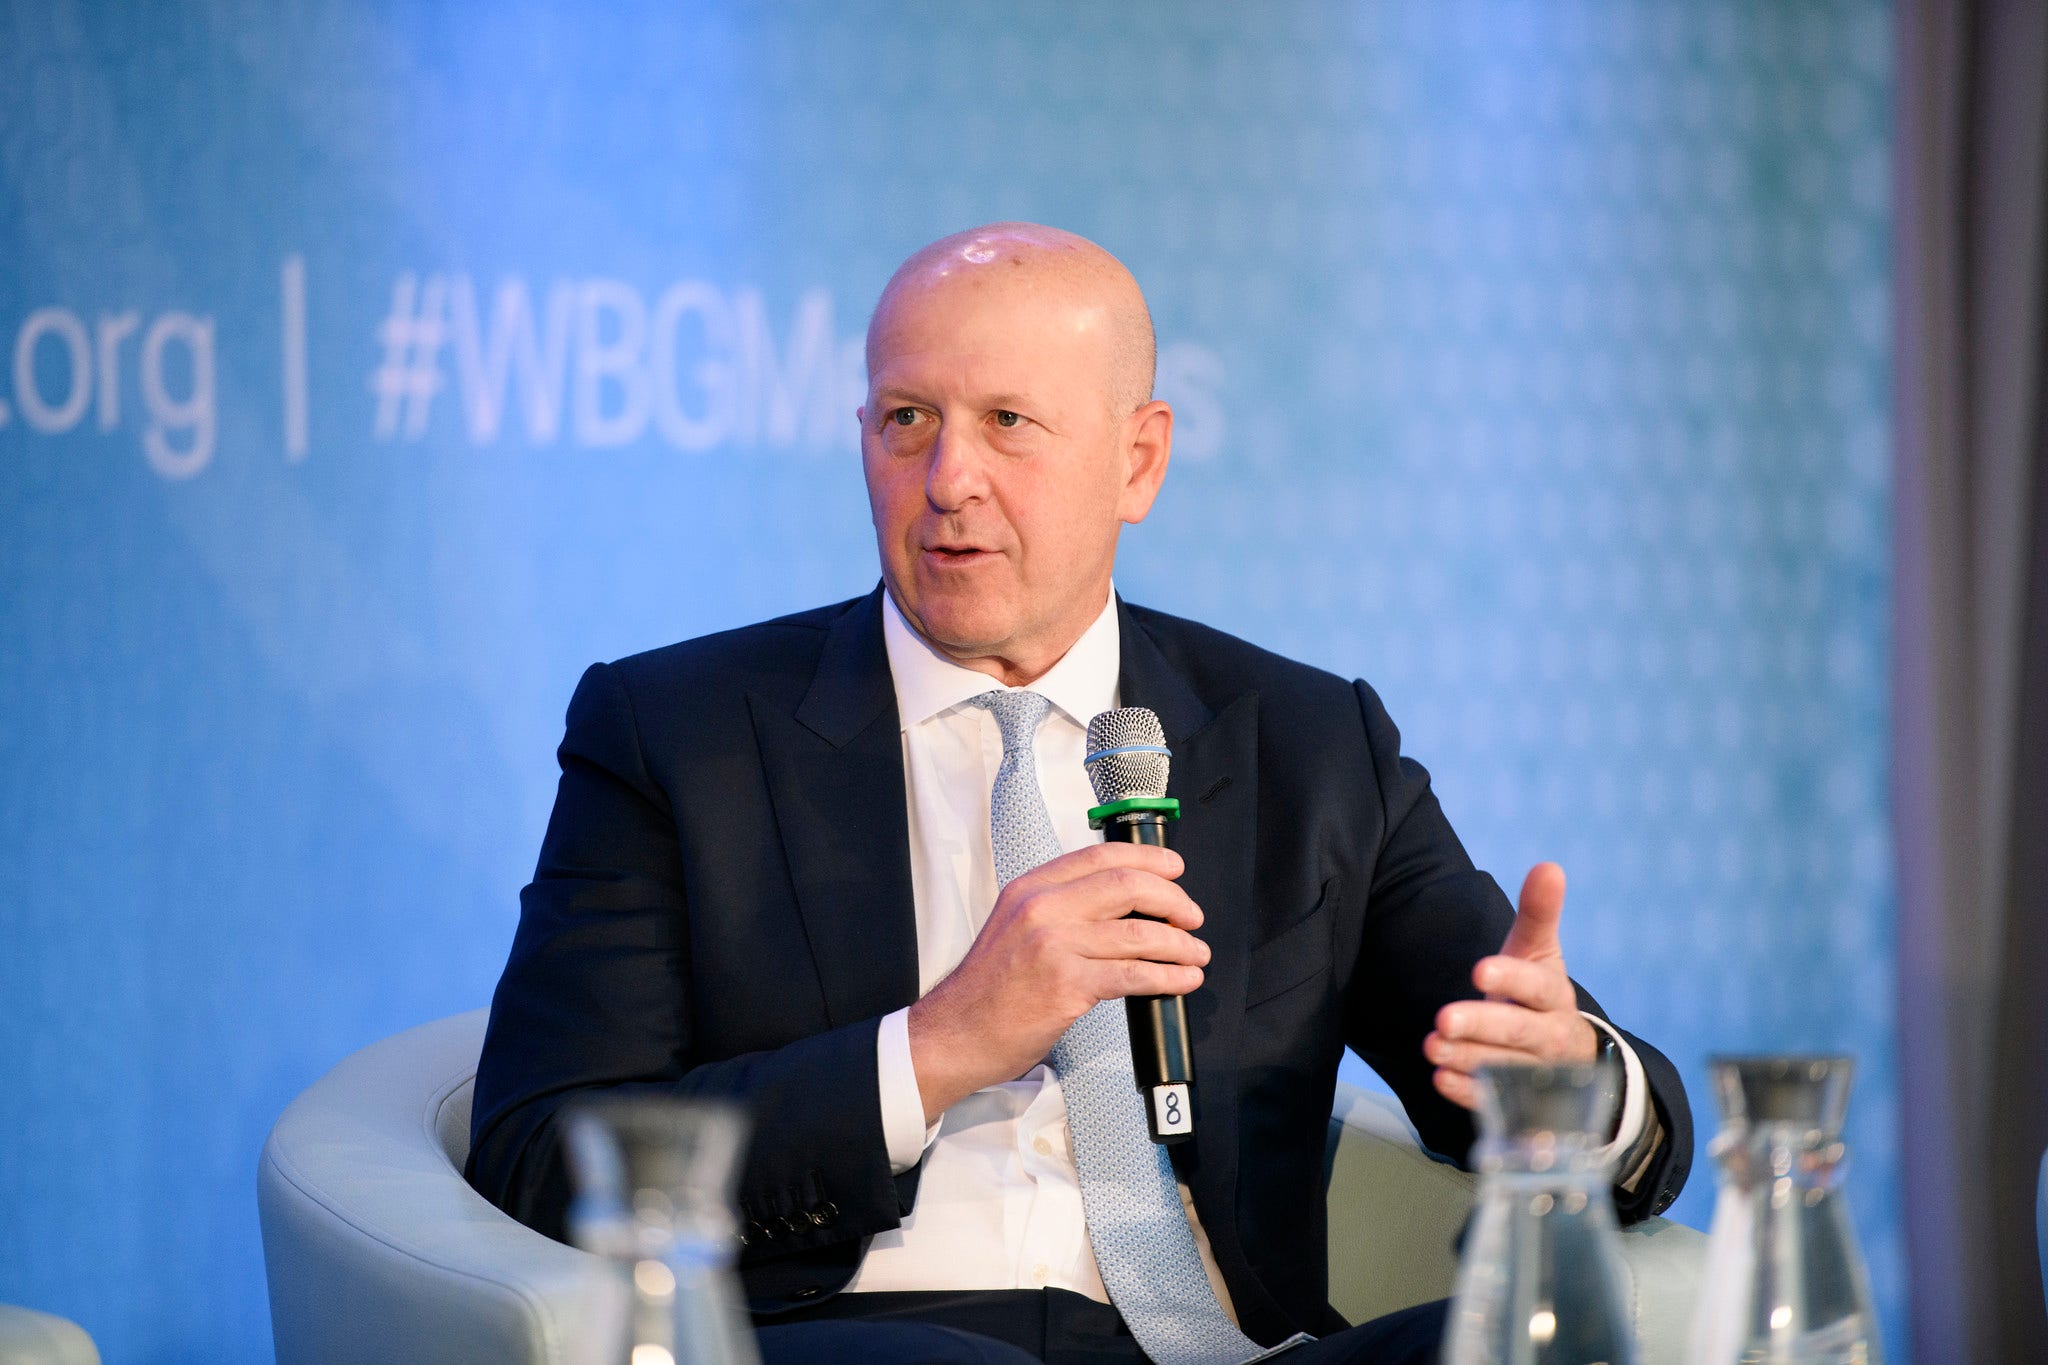 You Can Have Lunch With Goldman Sachs CEO David Solomon: Here's How